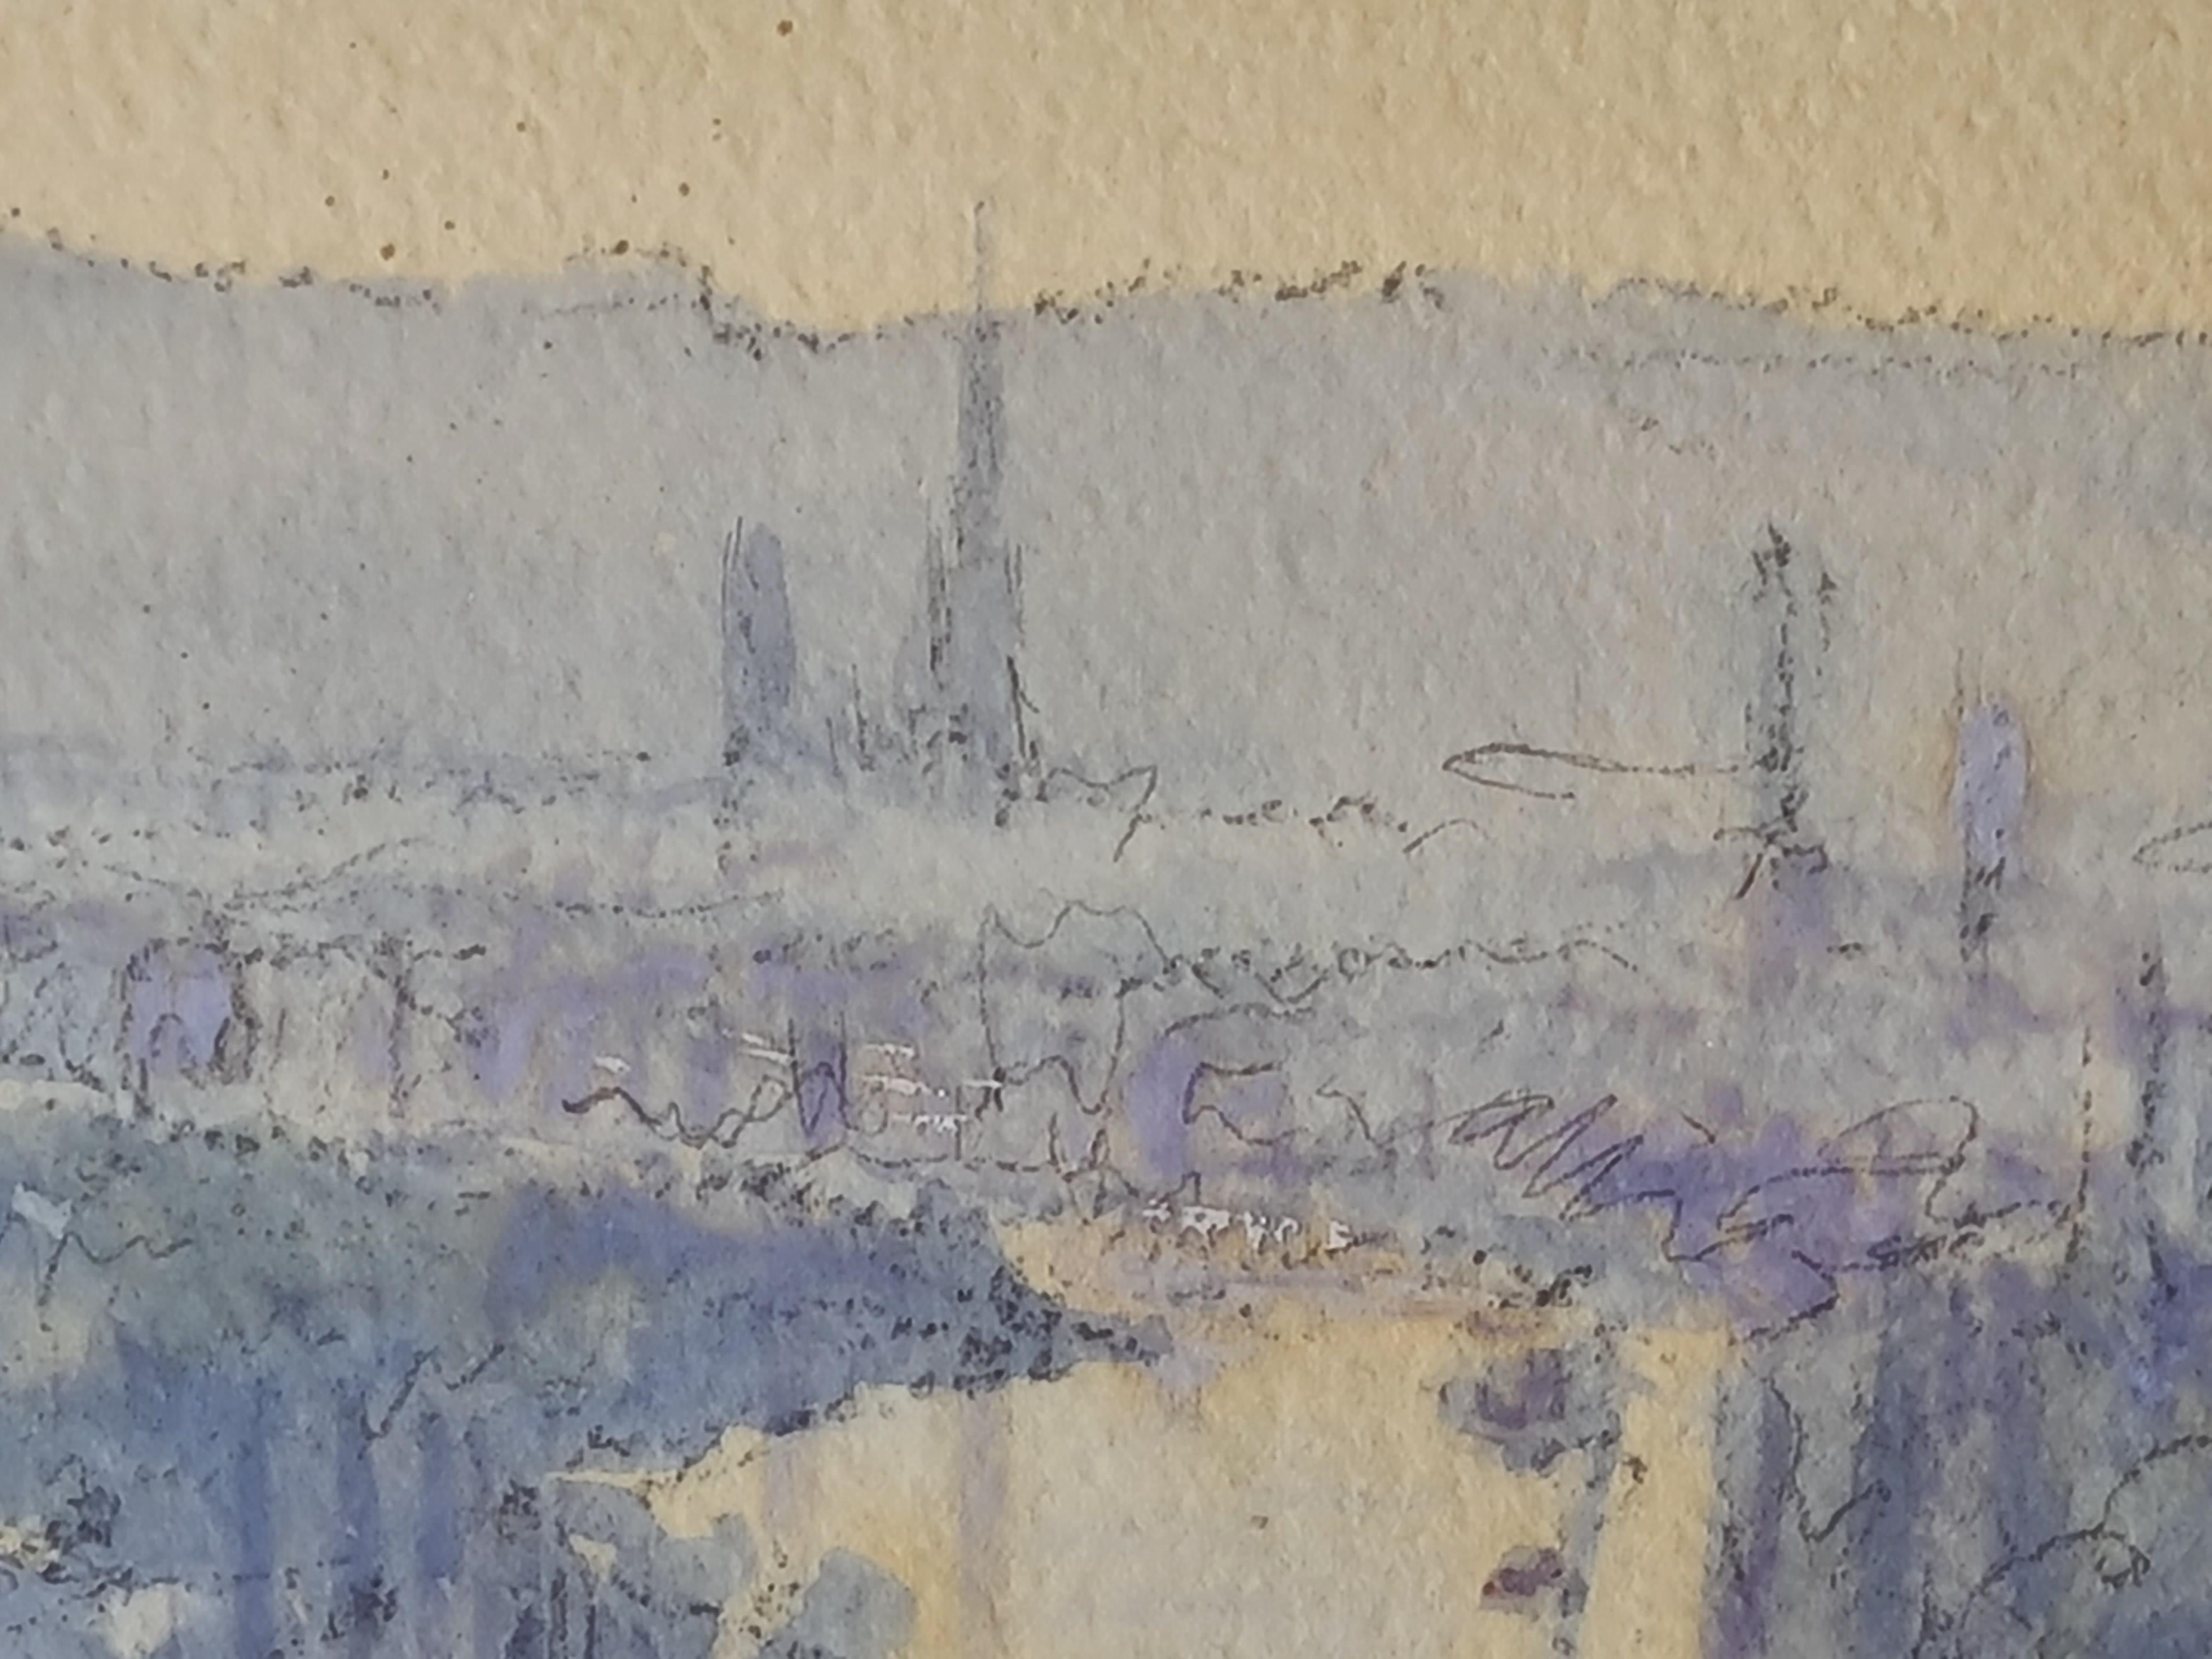 A pair of French Impressionist landscape views by Georges Planes. (Dimensions given are for each painting.)

The first painting: is an early 20th Century drawing and watercolour view of the city and riverscape at Rouen. The work is signed and dated